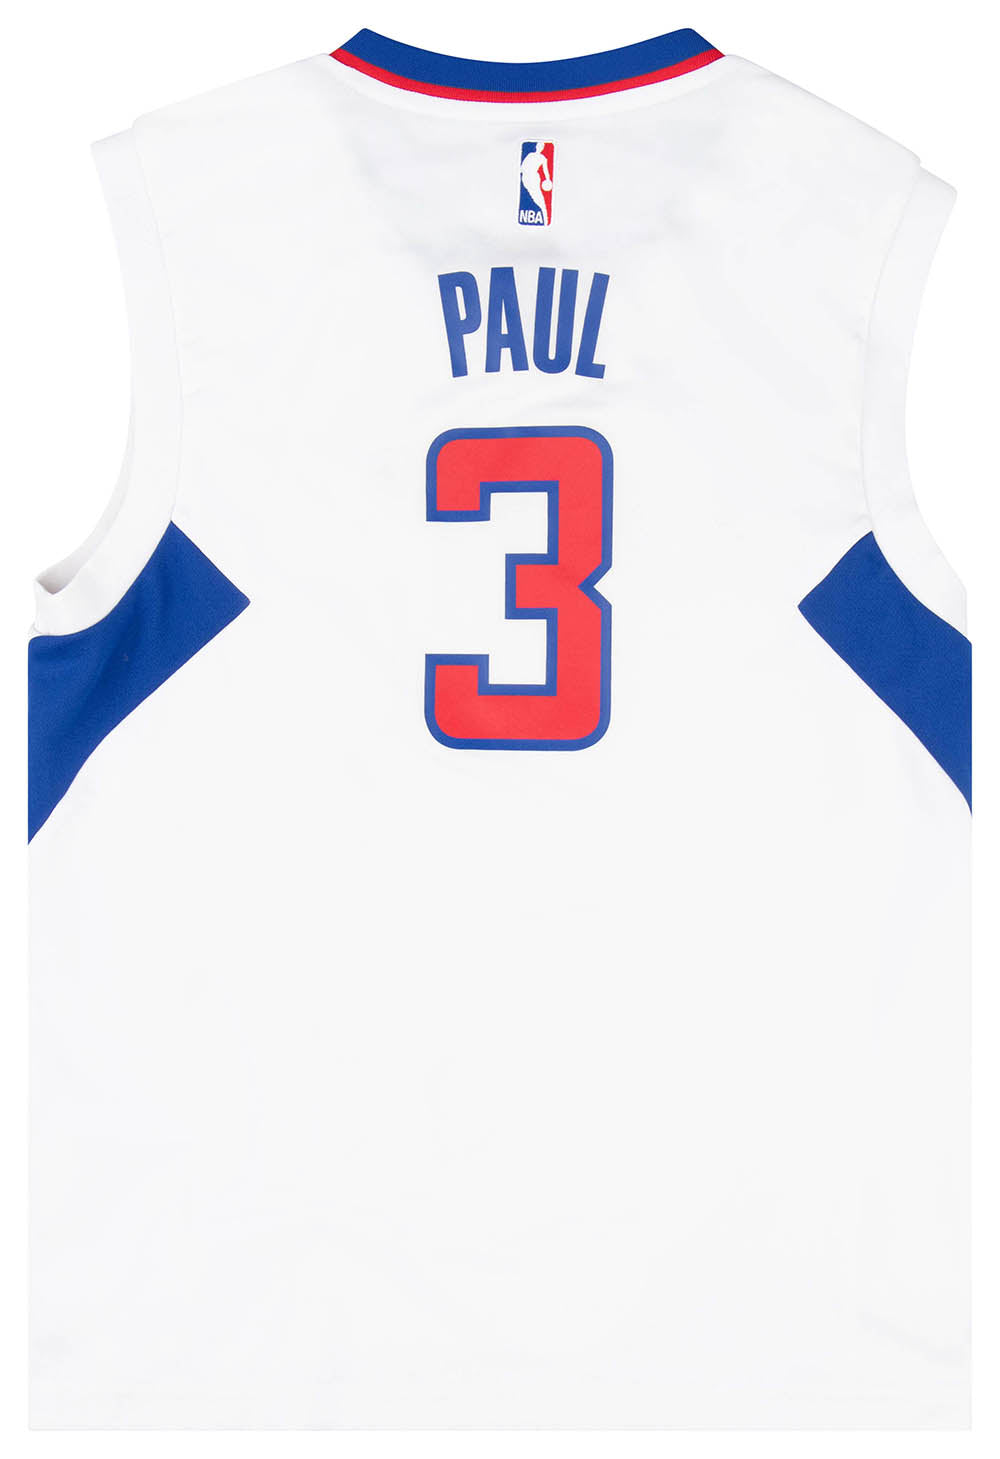 2014-15 LA CLIPPERS PAUL #3 ADIDAS JERSEY (HOME) M